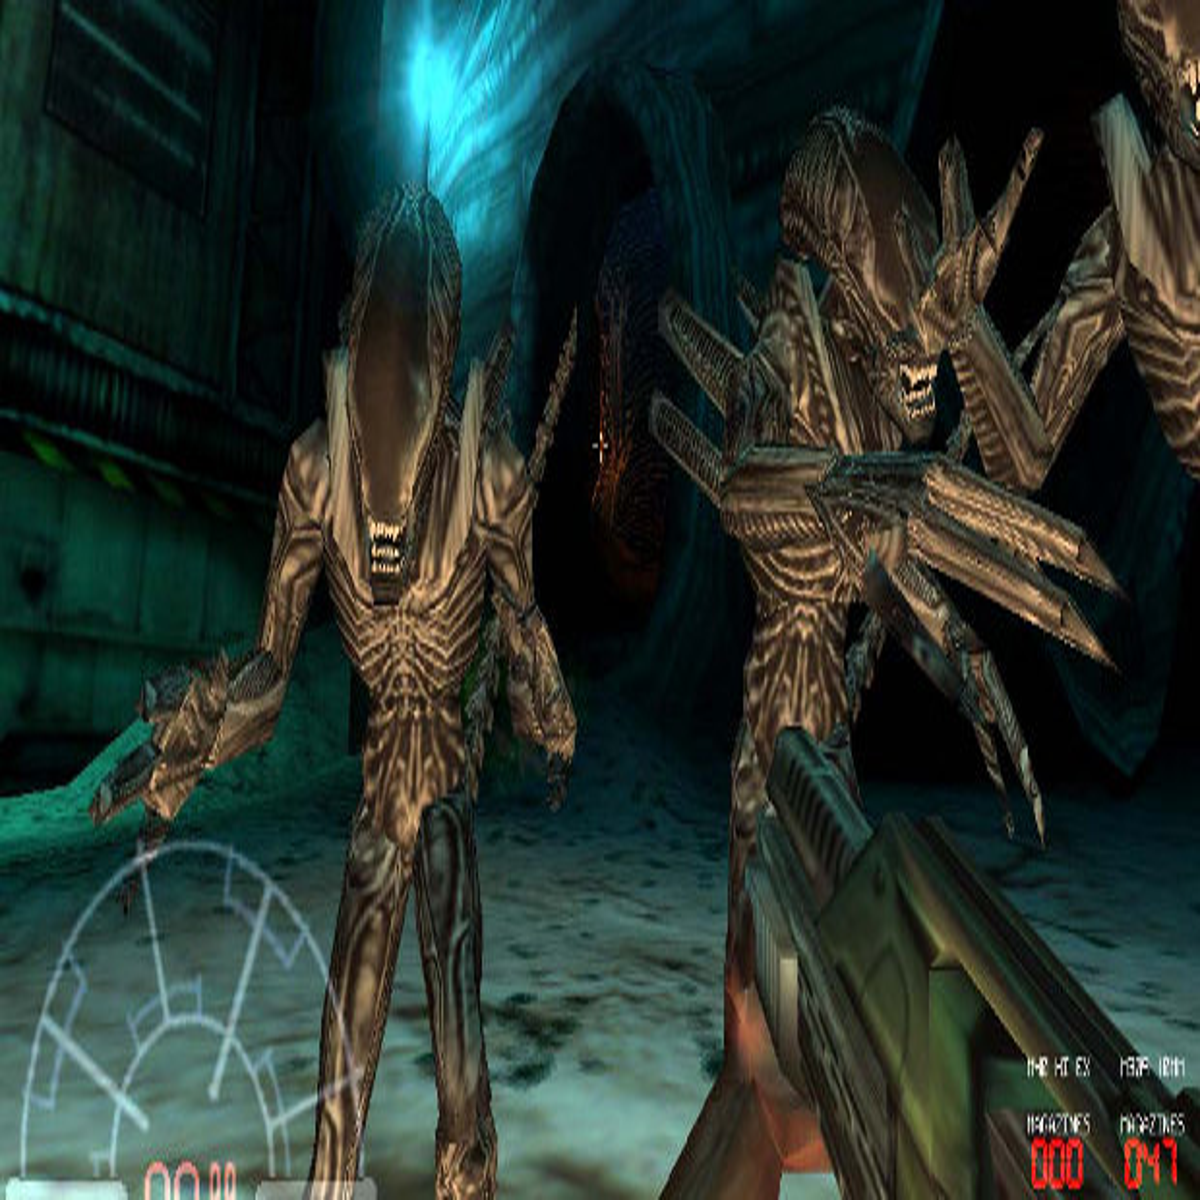 You can now play Aliens vs. Predator (2010) on Xbox One!